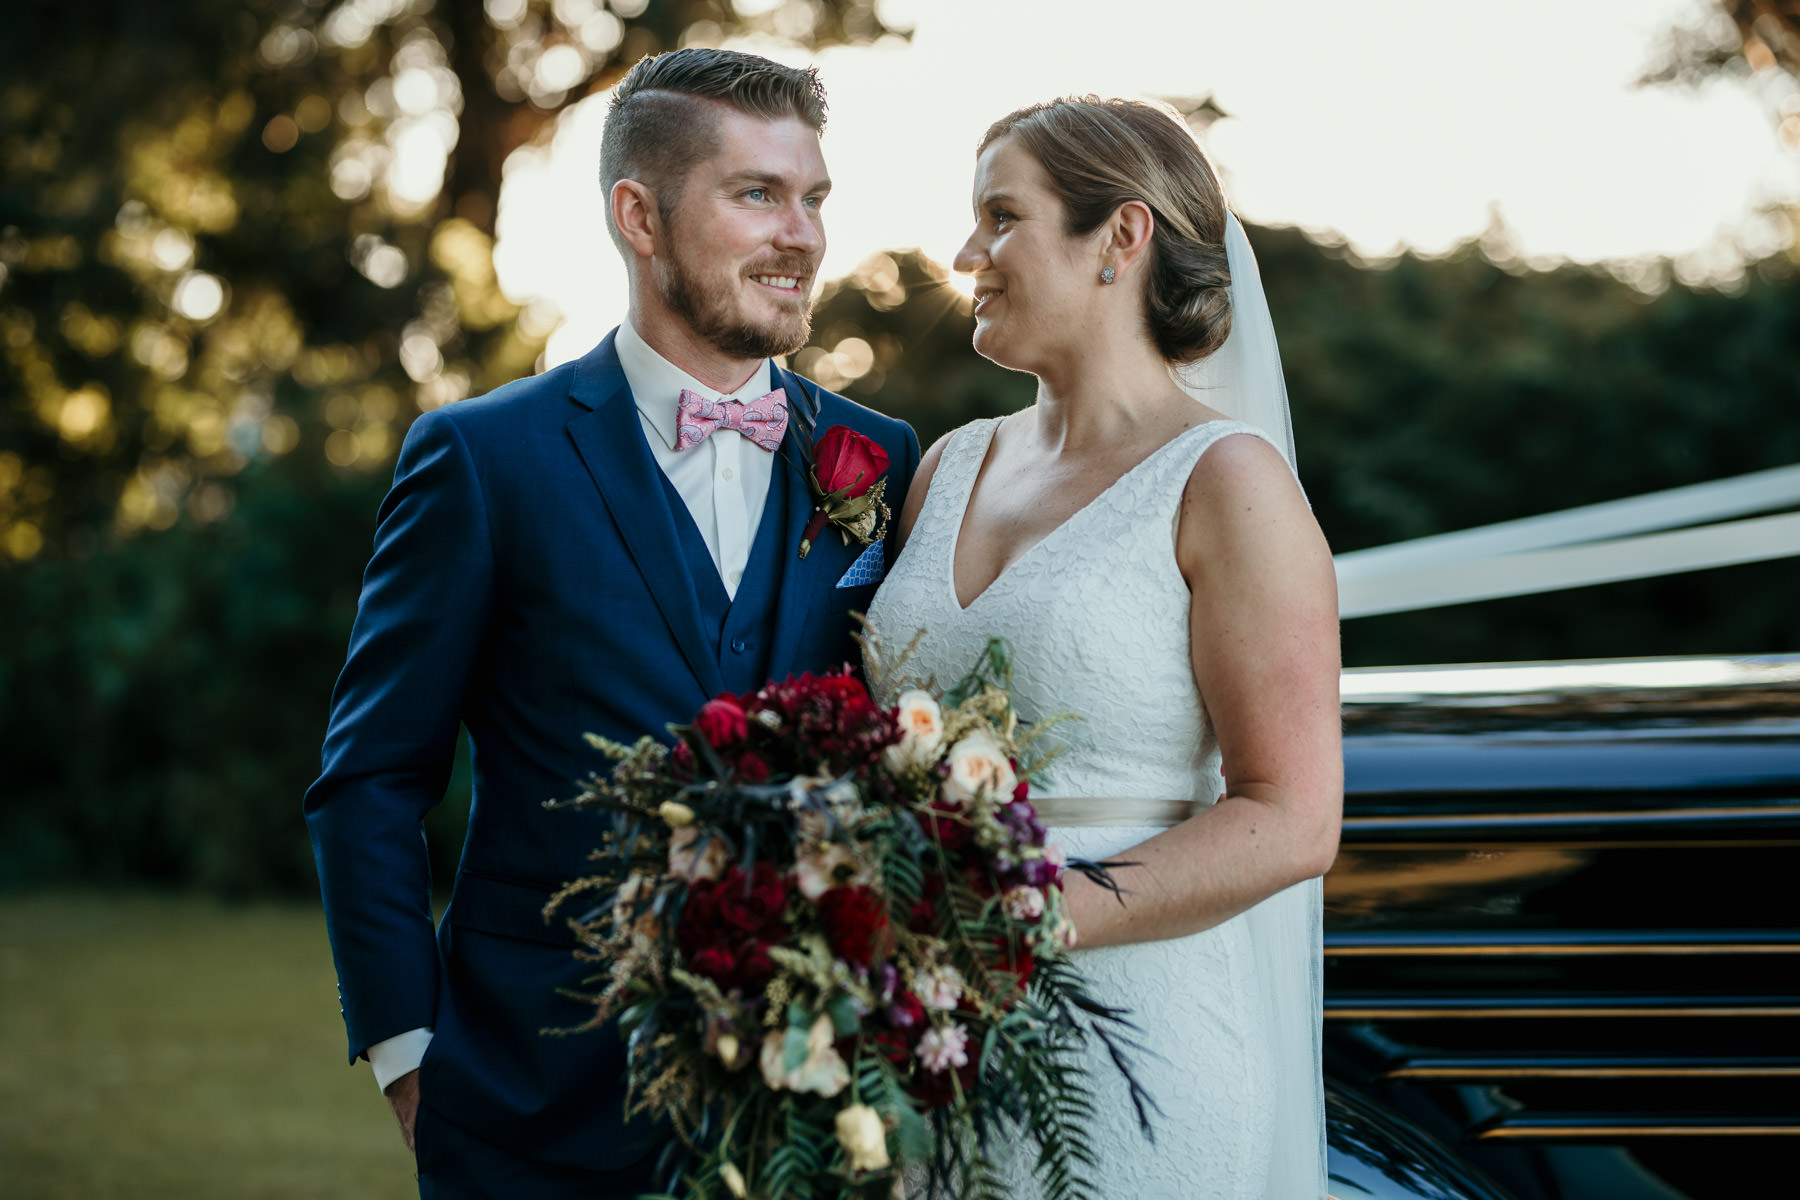 087Hunter Valley Wedding Photographers Bryce Noone Photography at Tocal Homestead Wedding Venue.jpg